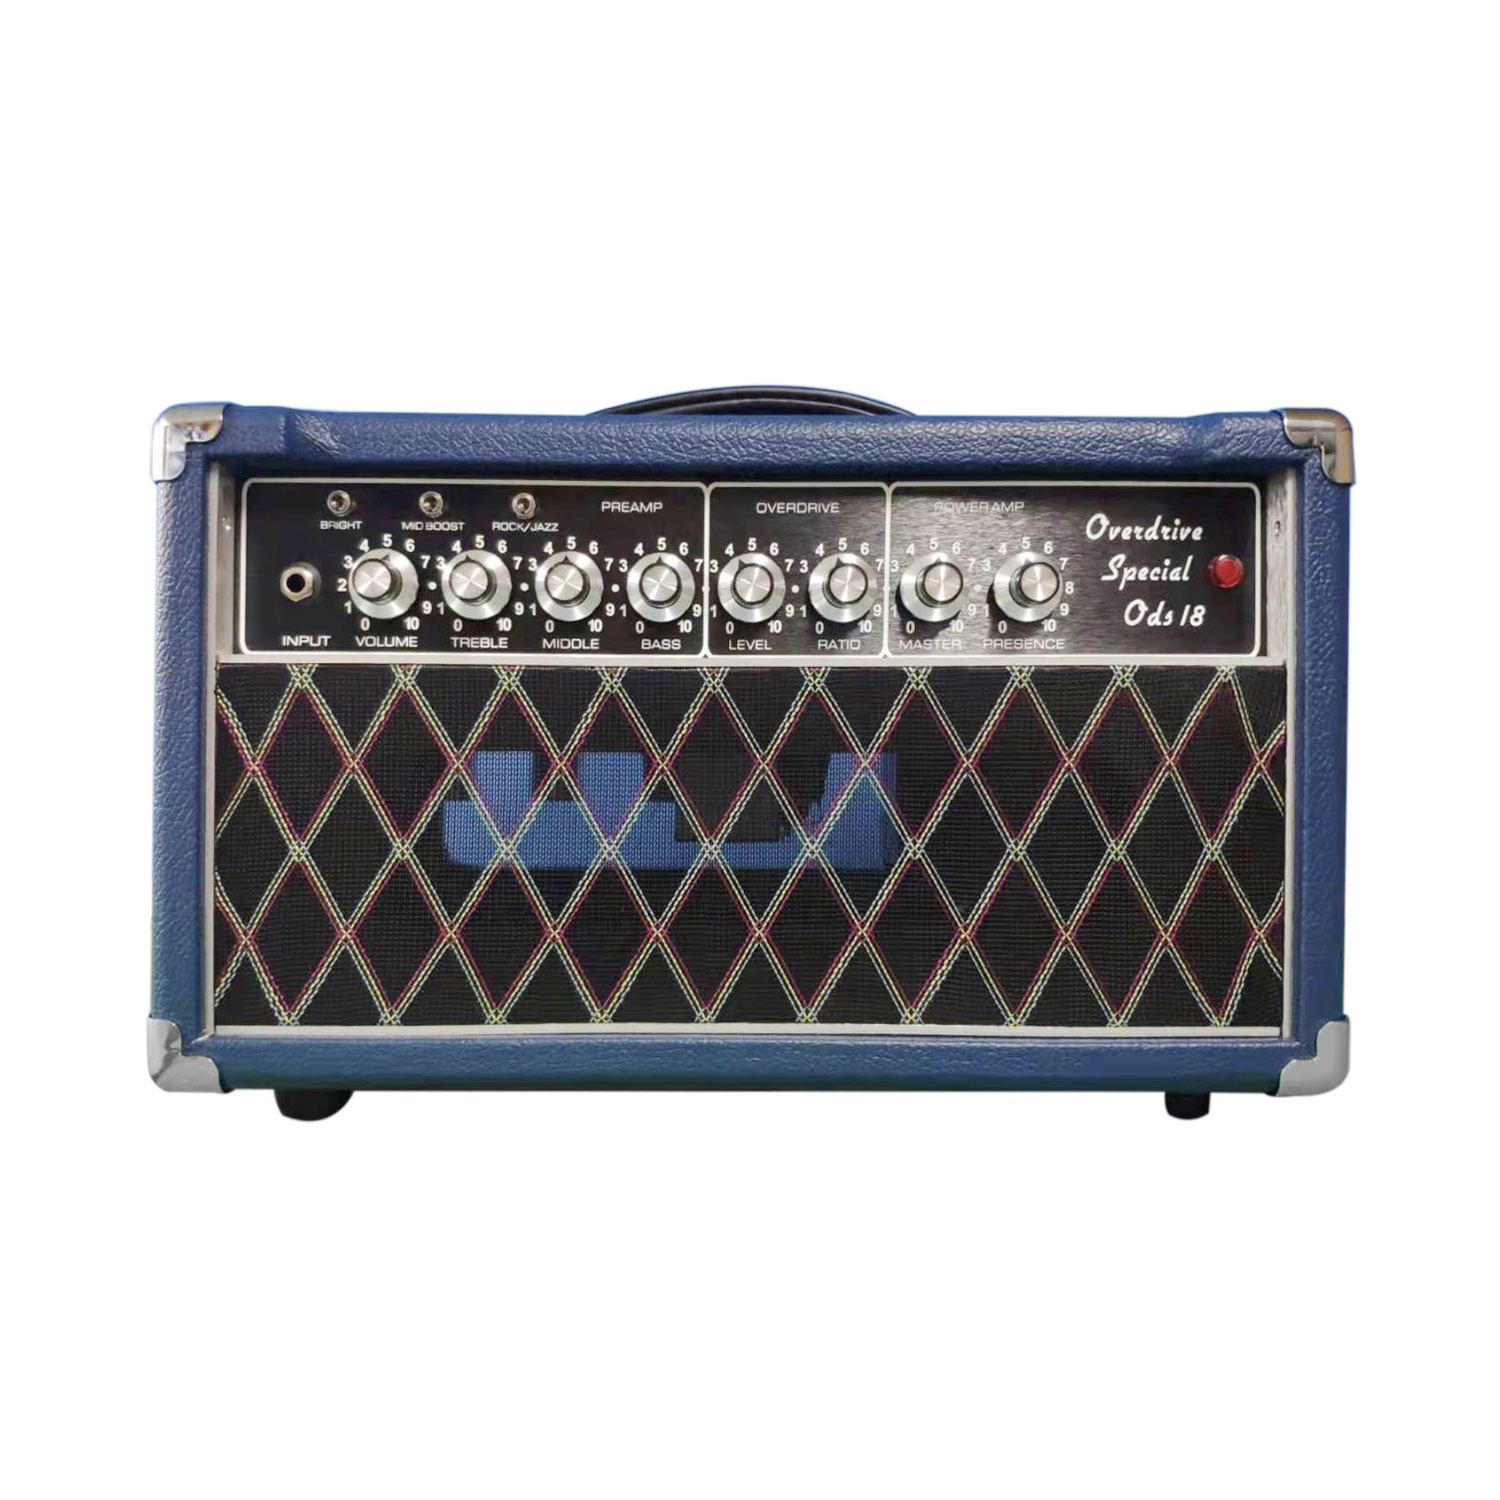 Custom Overdrive Special Amplifier Head 20W Valve Guitar Amp Combo JJ Tubes 2 x EL84; 3 x 12ax7 with Loop